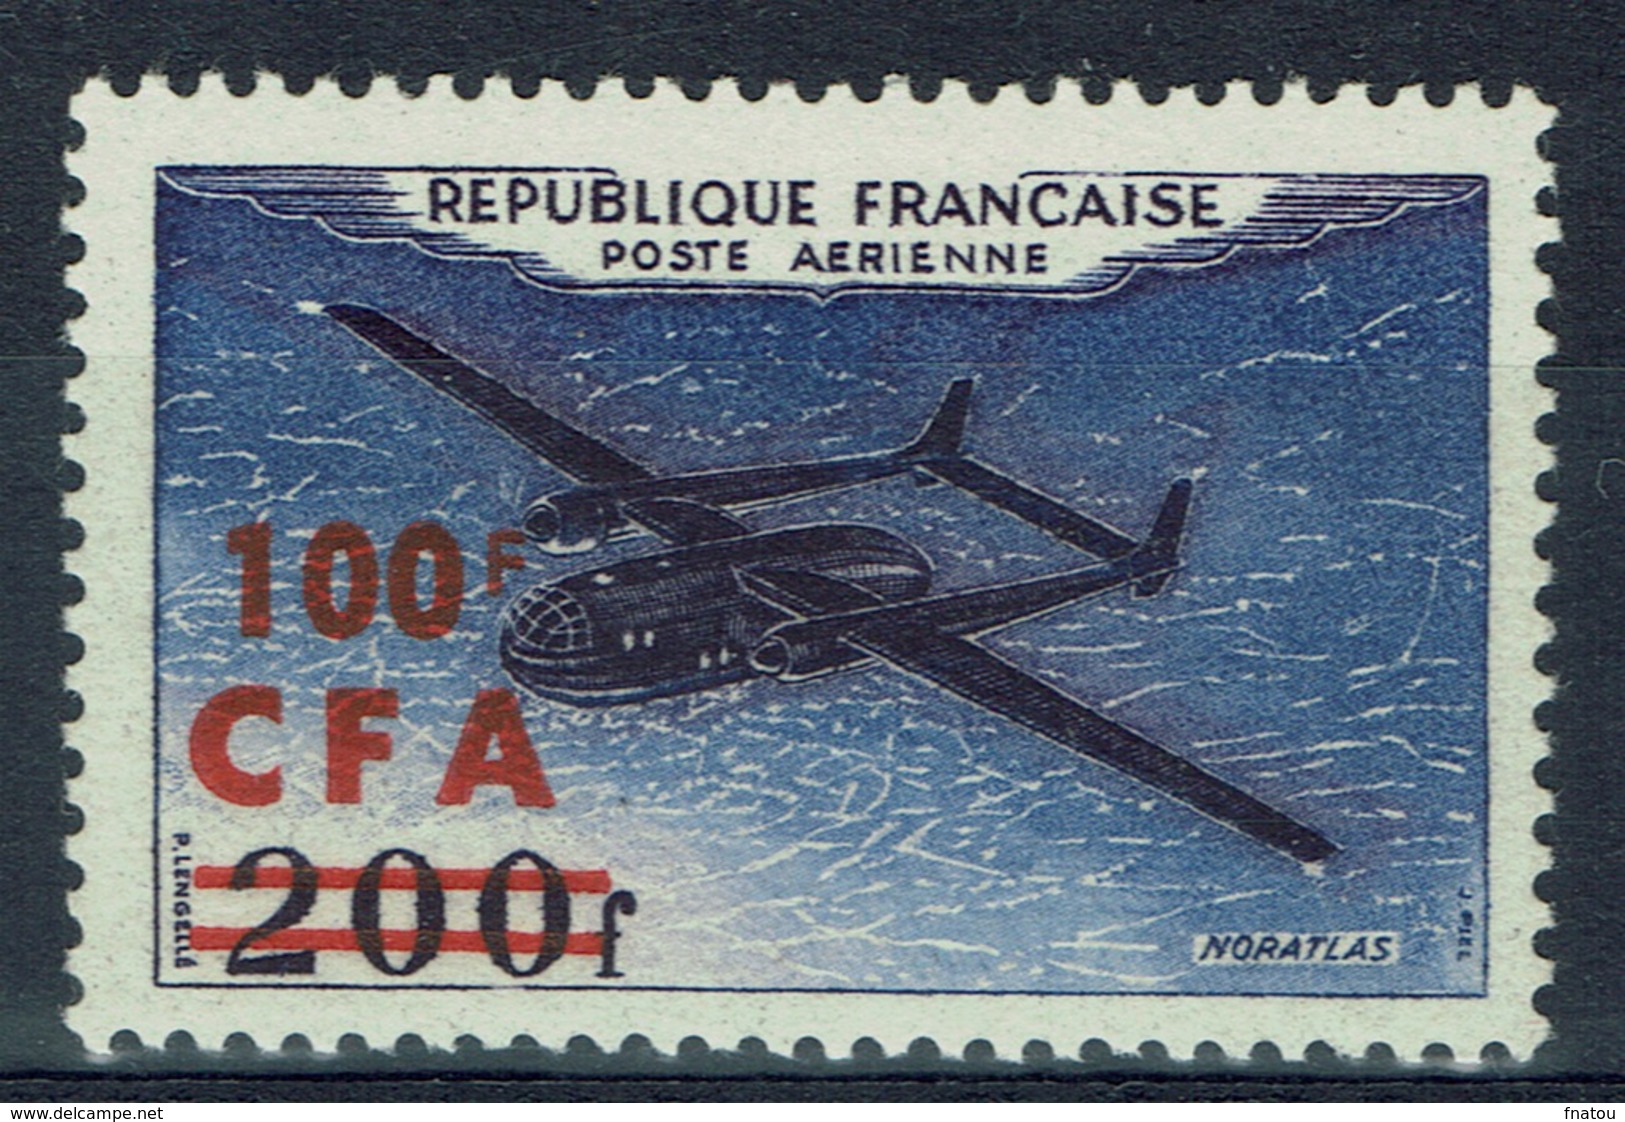 Réunion Island, Aircraft, "Noratlas", French Stamp Overprint, 1954, MNH VF Airmail - Airmail